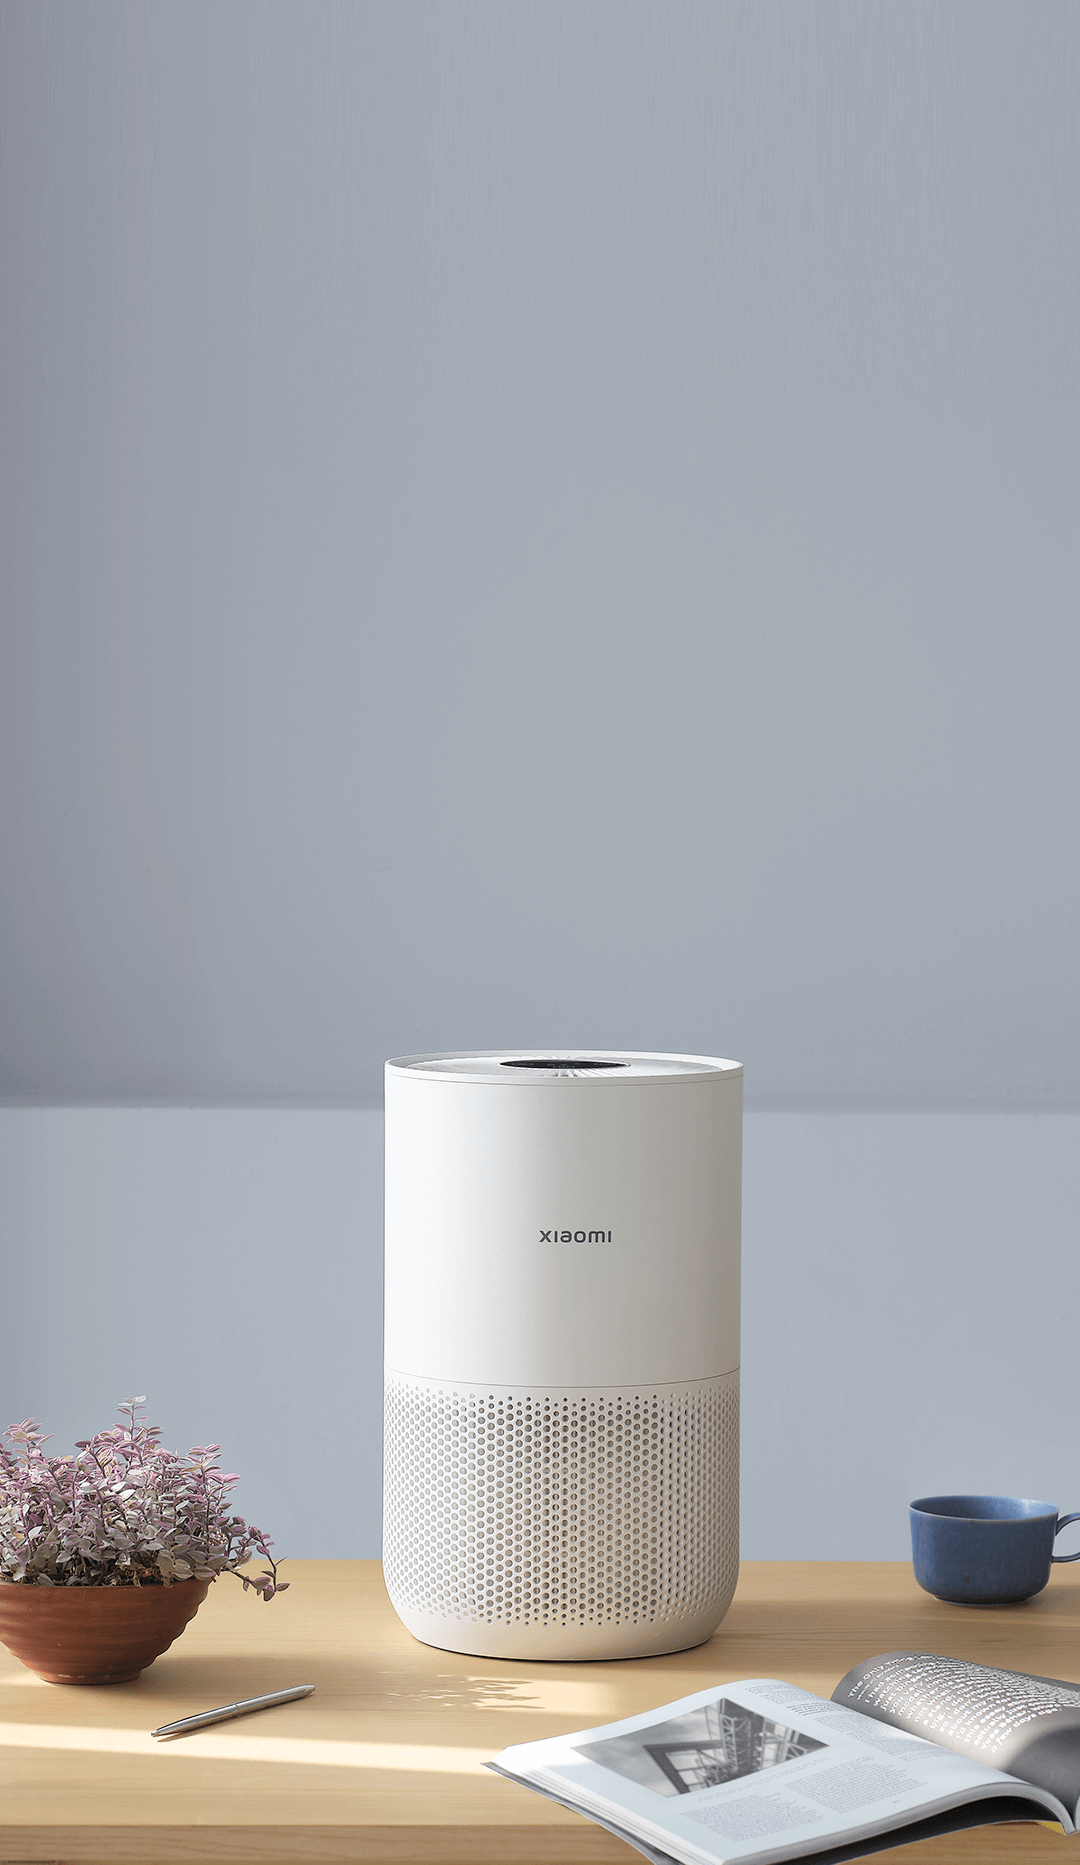 Xiaomi Air Purifiers,High Efficiency Filter Air Purifiers for Home Large  Room up to 409 sqft,Quiet,Intelligent Control and LED Display Air Filter  for